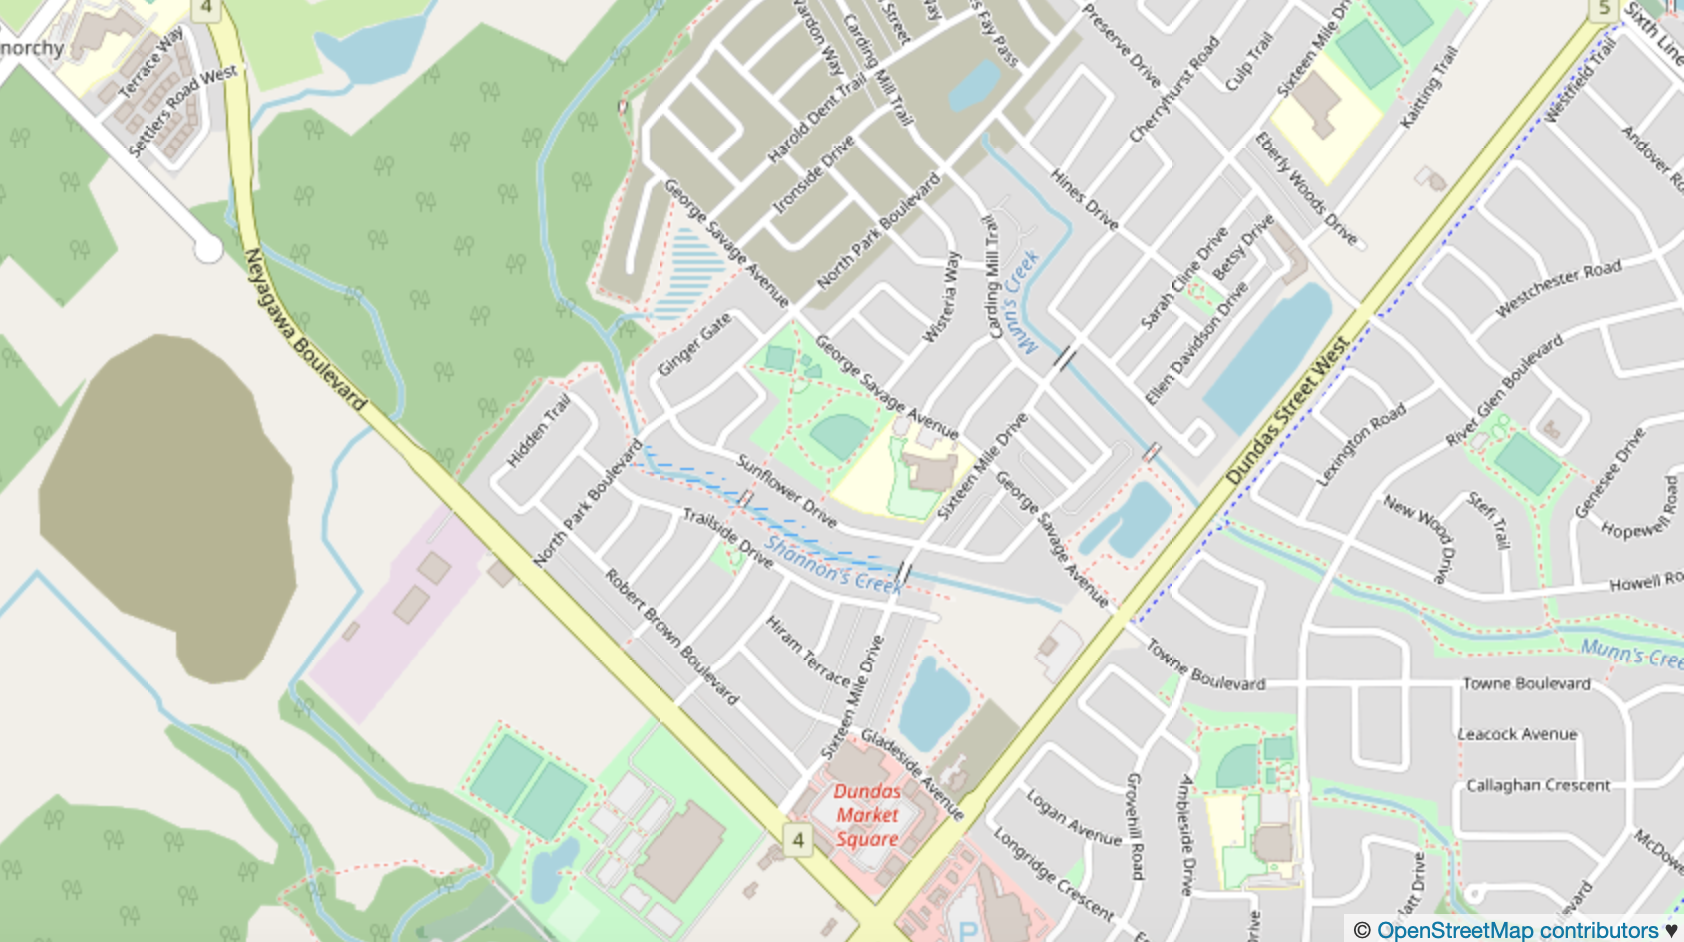 Glenorchy Armed Robbery April 22 2020 | © OpenStreetMap contributors CC BY-SA